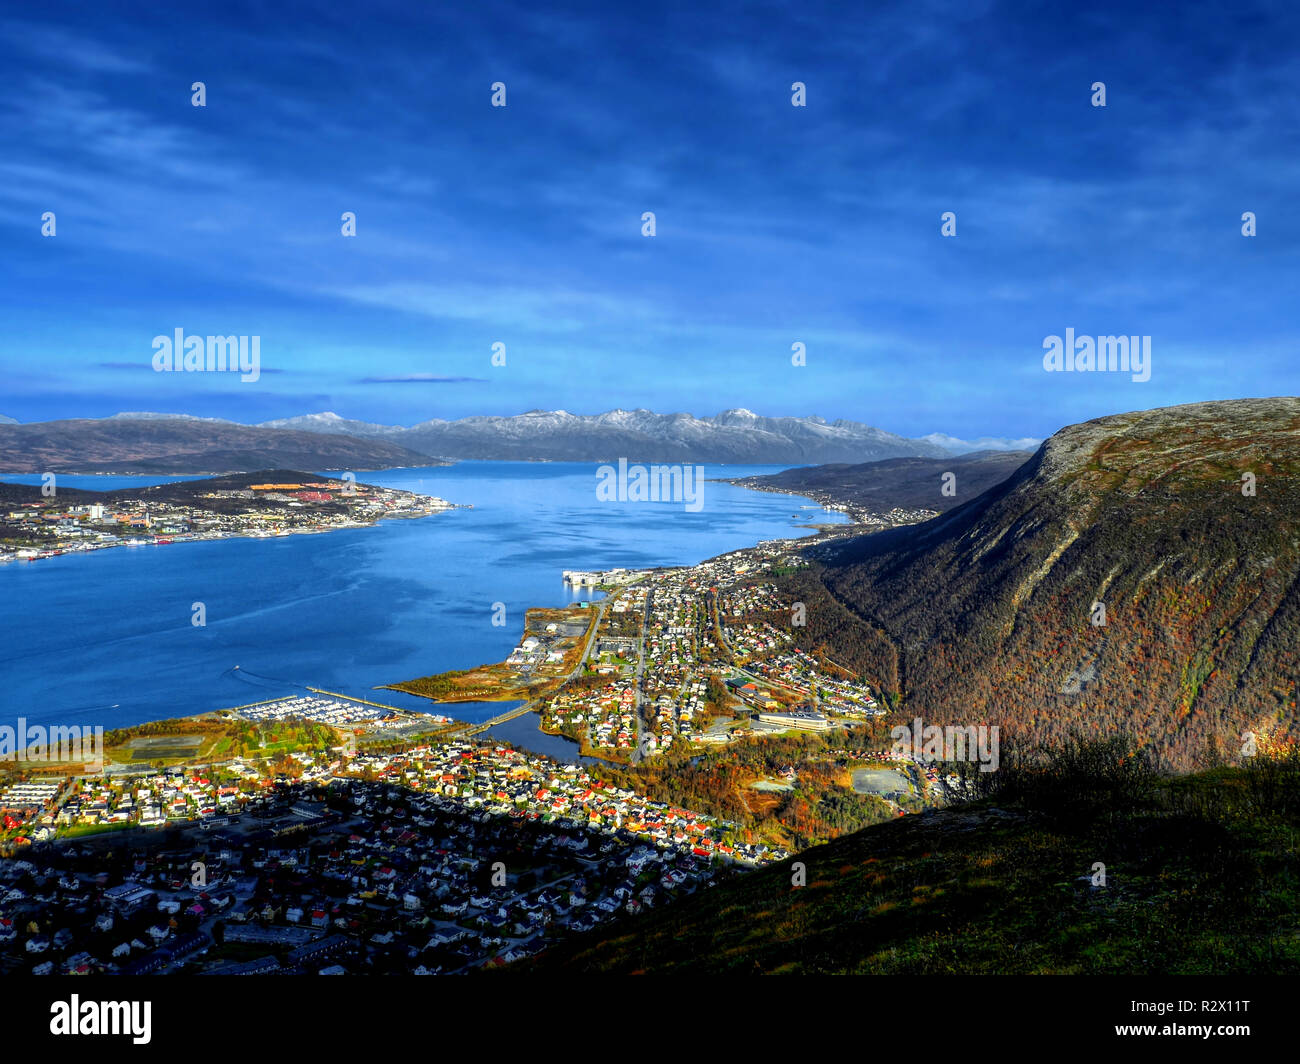 Landscape / view over Tromsø and Tromsdalen, Norway Stock Photo